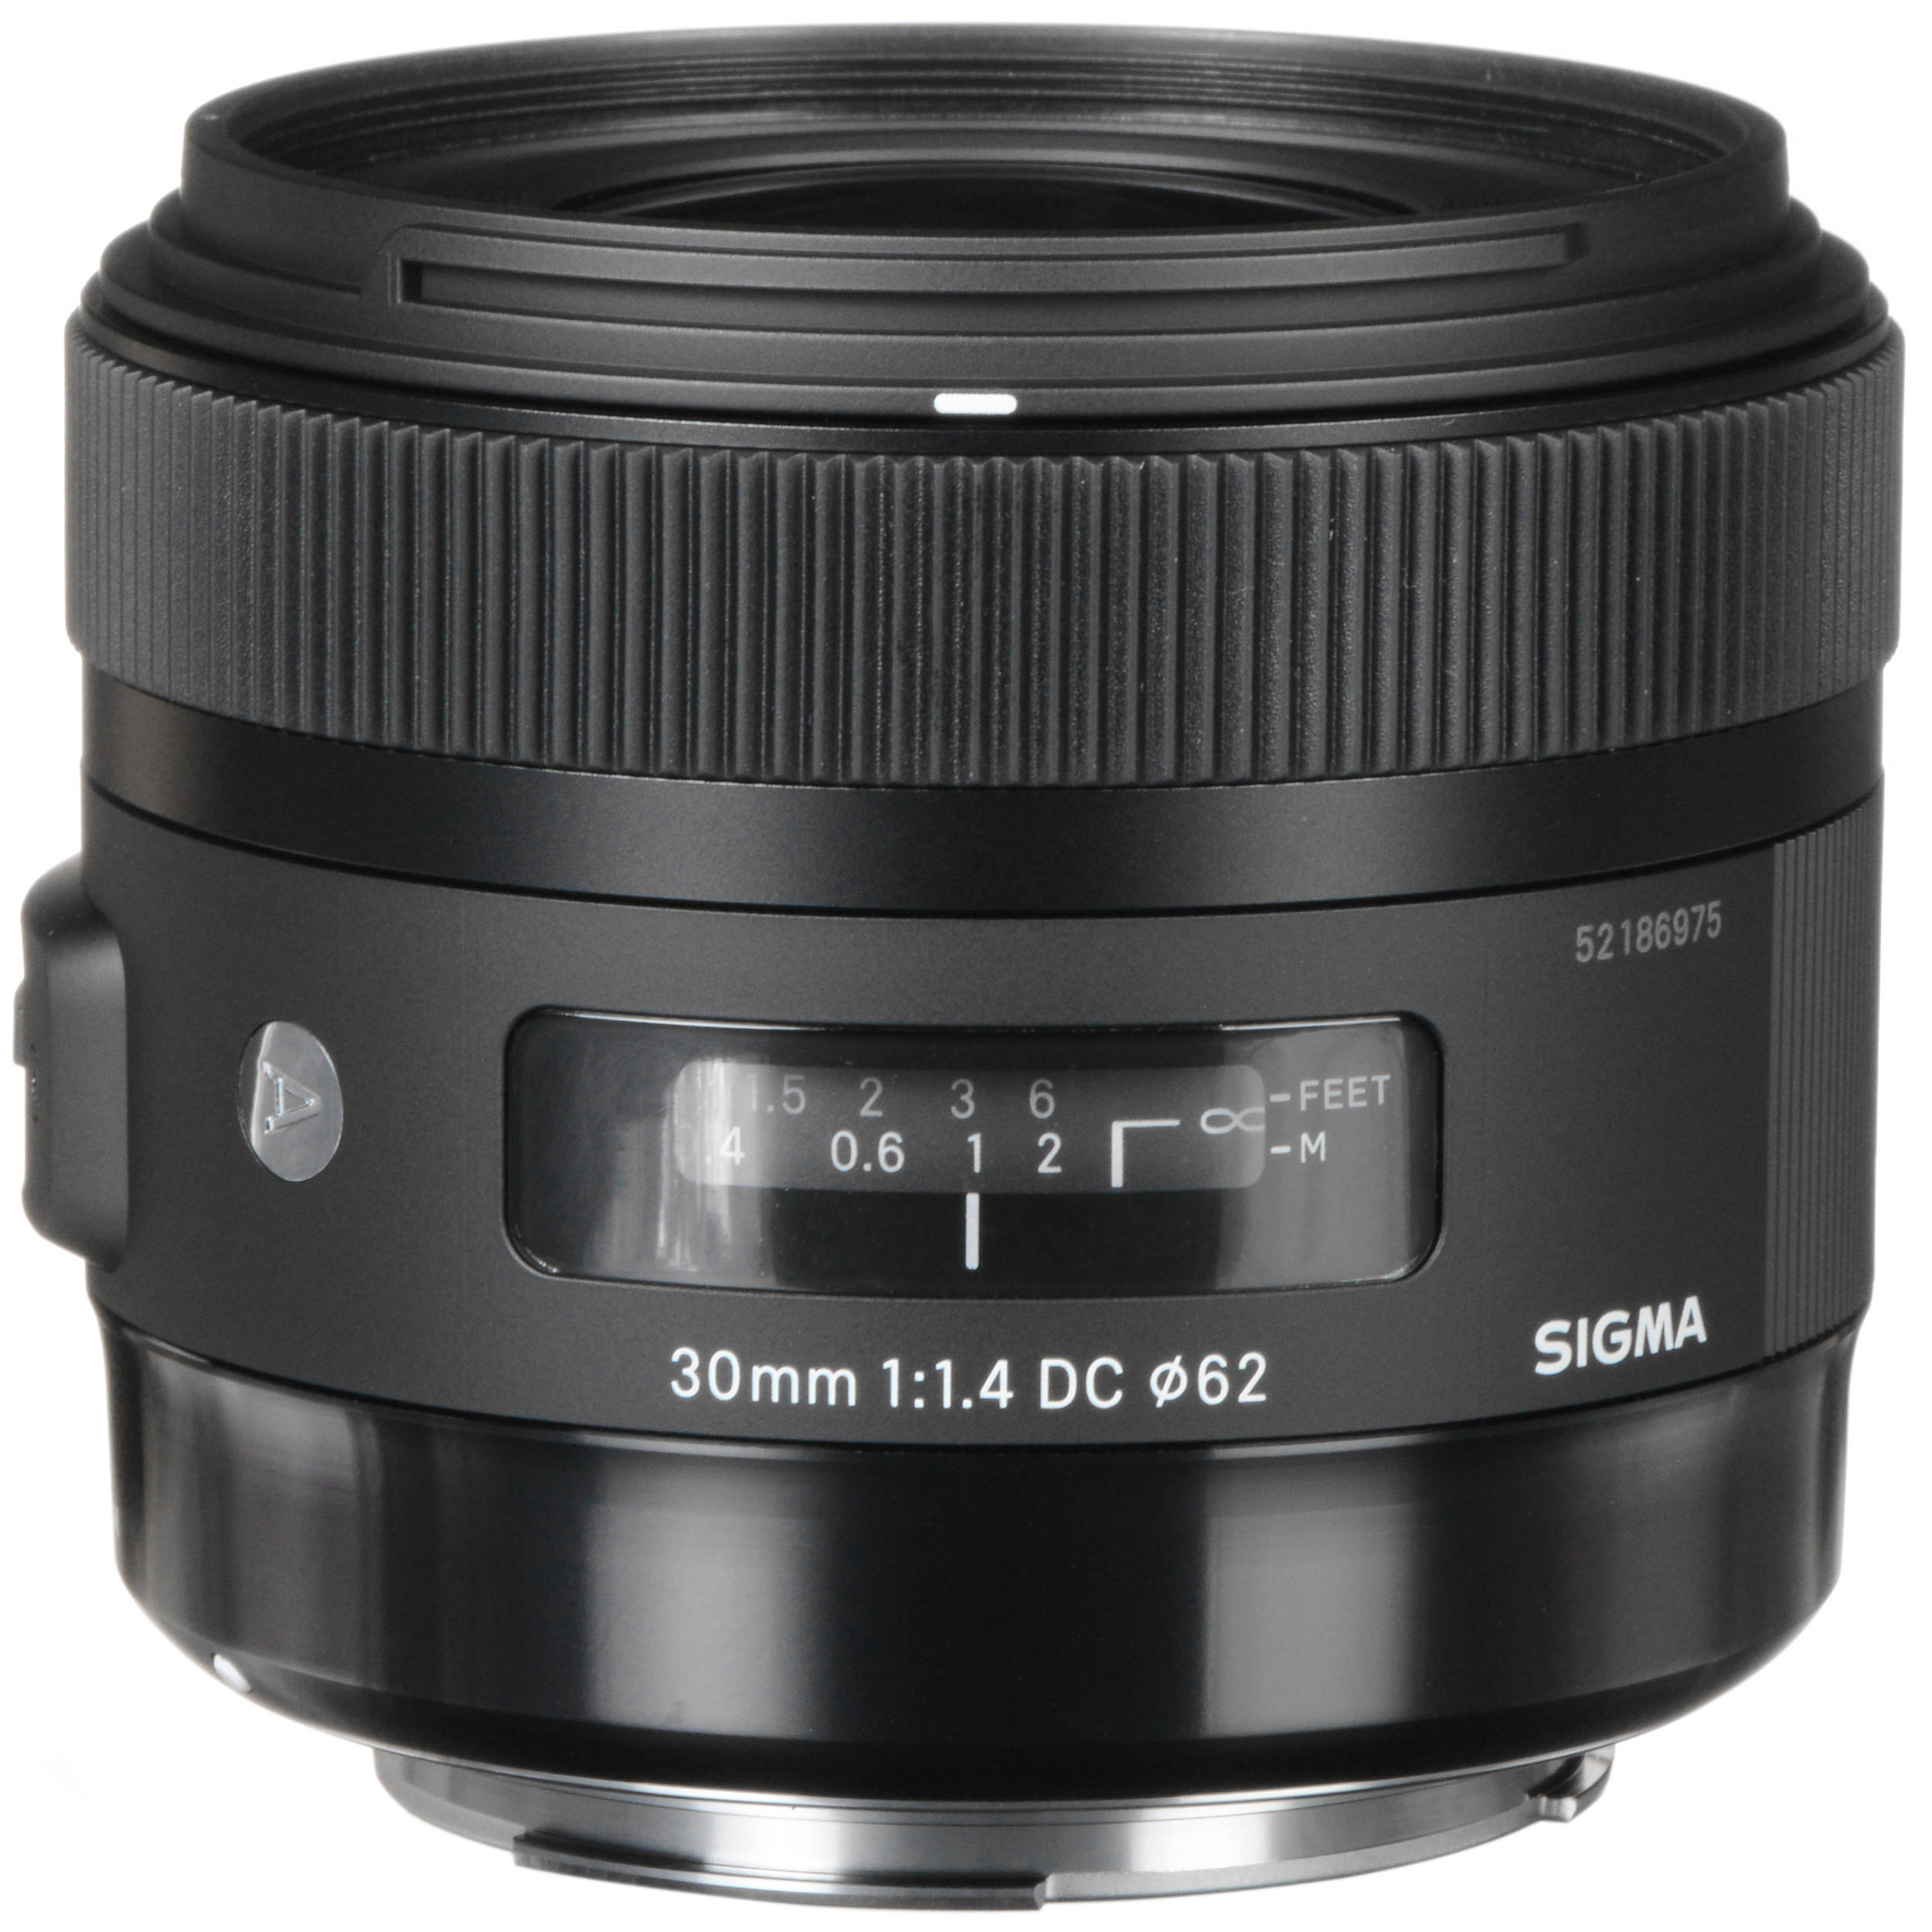 Sigma 30mm F 1 4 Dc Hsm Art Lens For Canon Ef 301 101 B H Photo